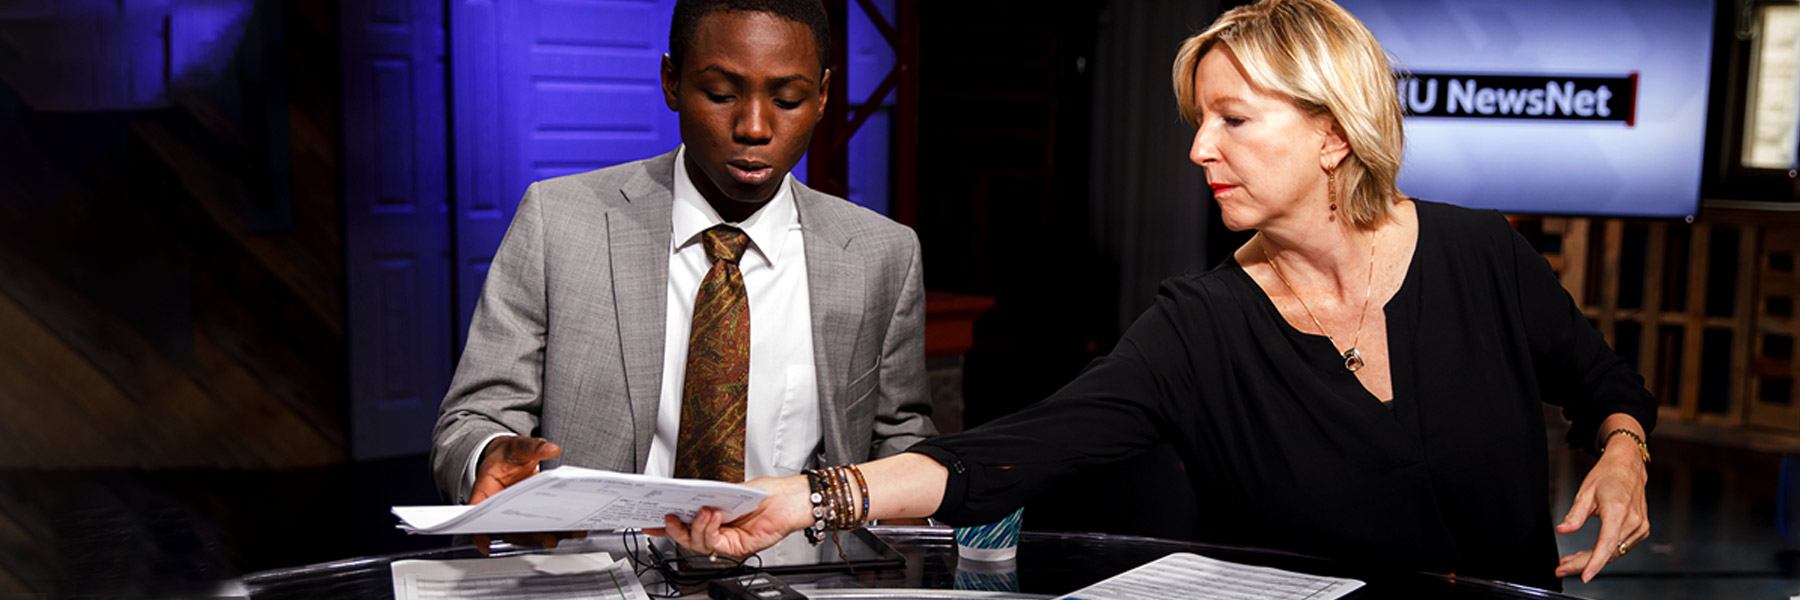 A student and a reporter sit at a table in a TV studio.